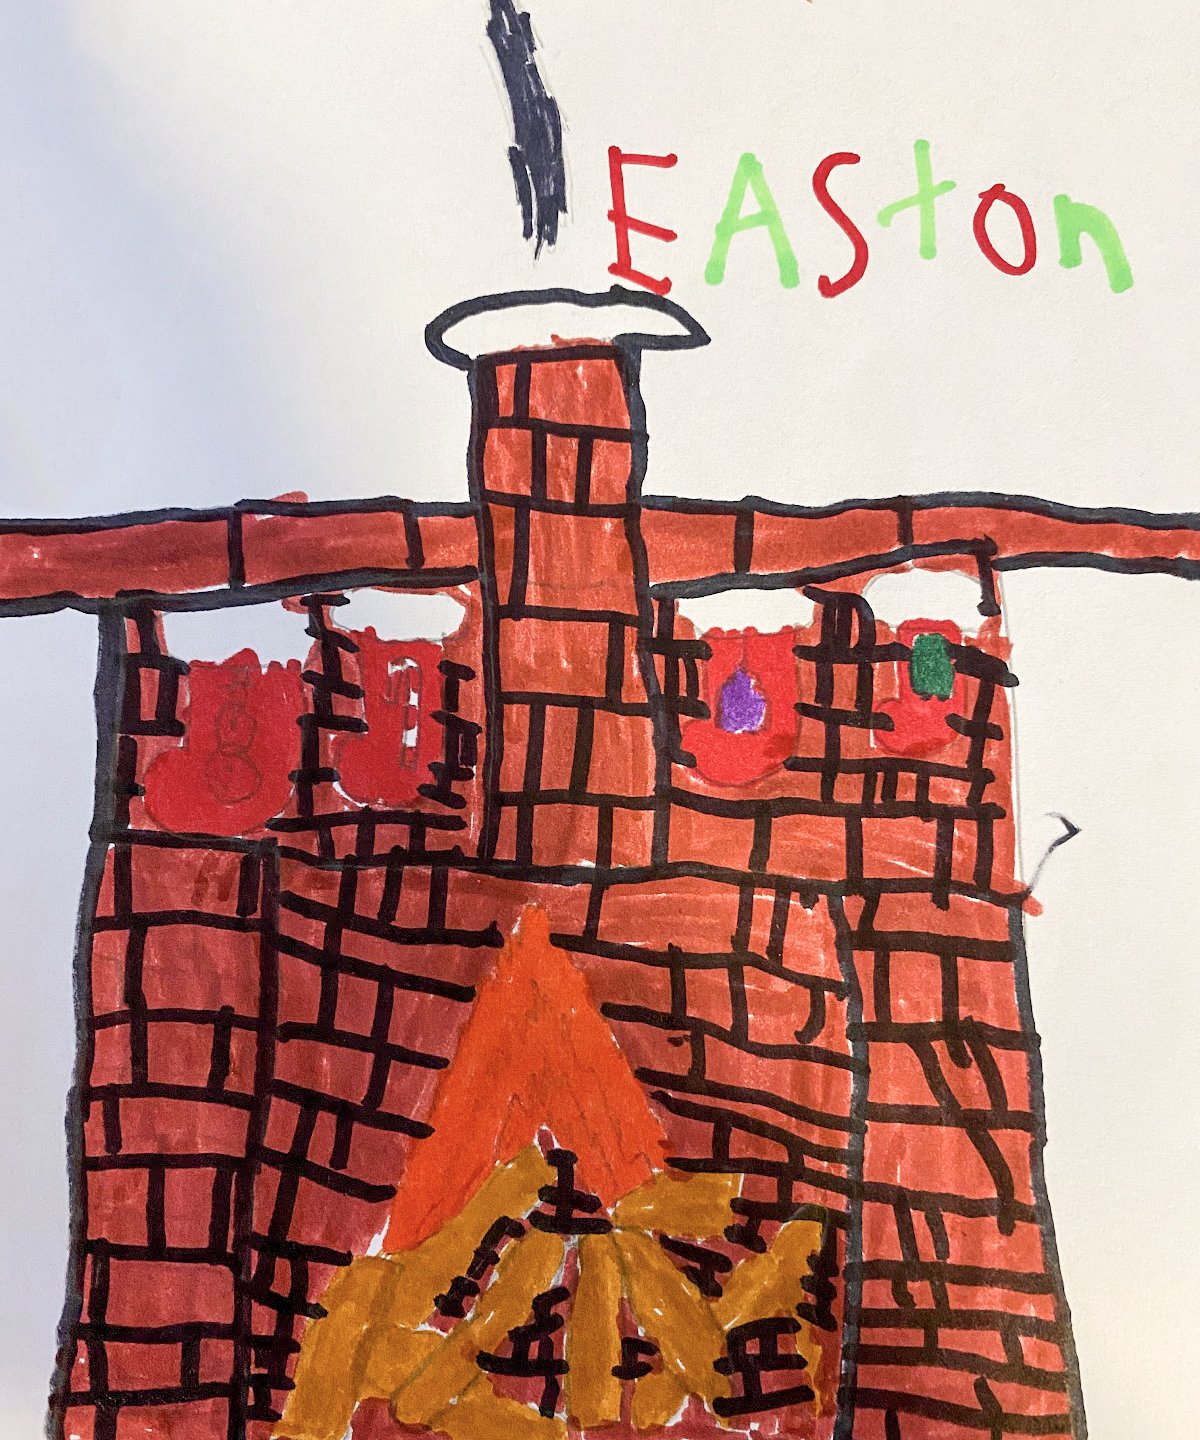 Artwork by Easton, Age 8 from Fredericton